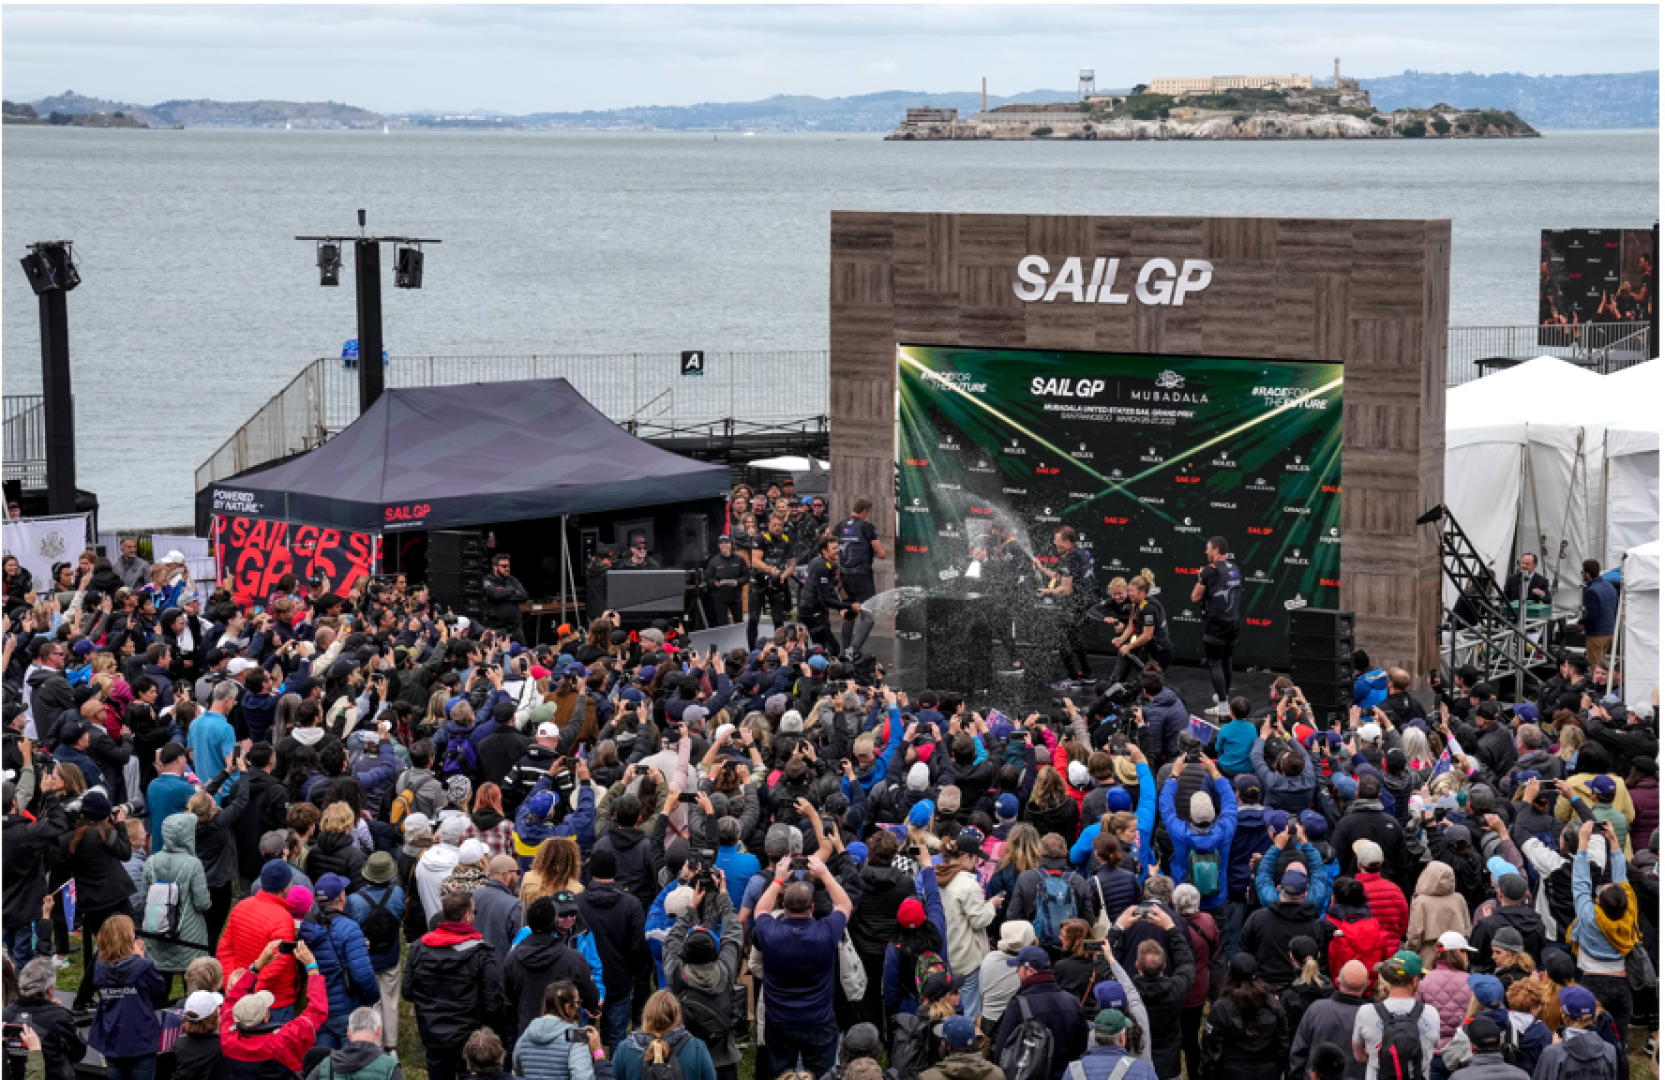 Australia defends SailGP Championship title in extraordinary scenes on San Francisco Bay, New Zealand wins first-ever Impact League title